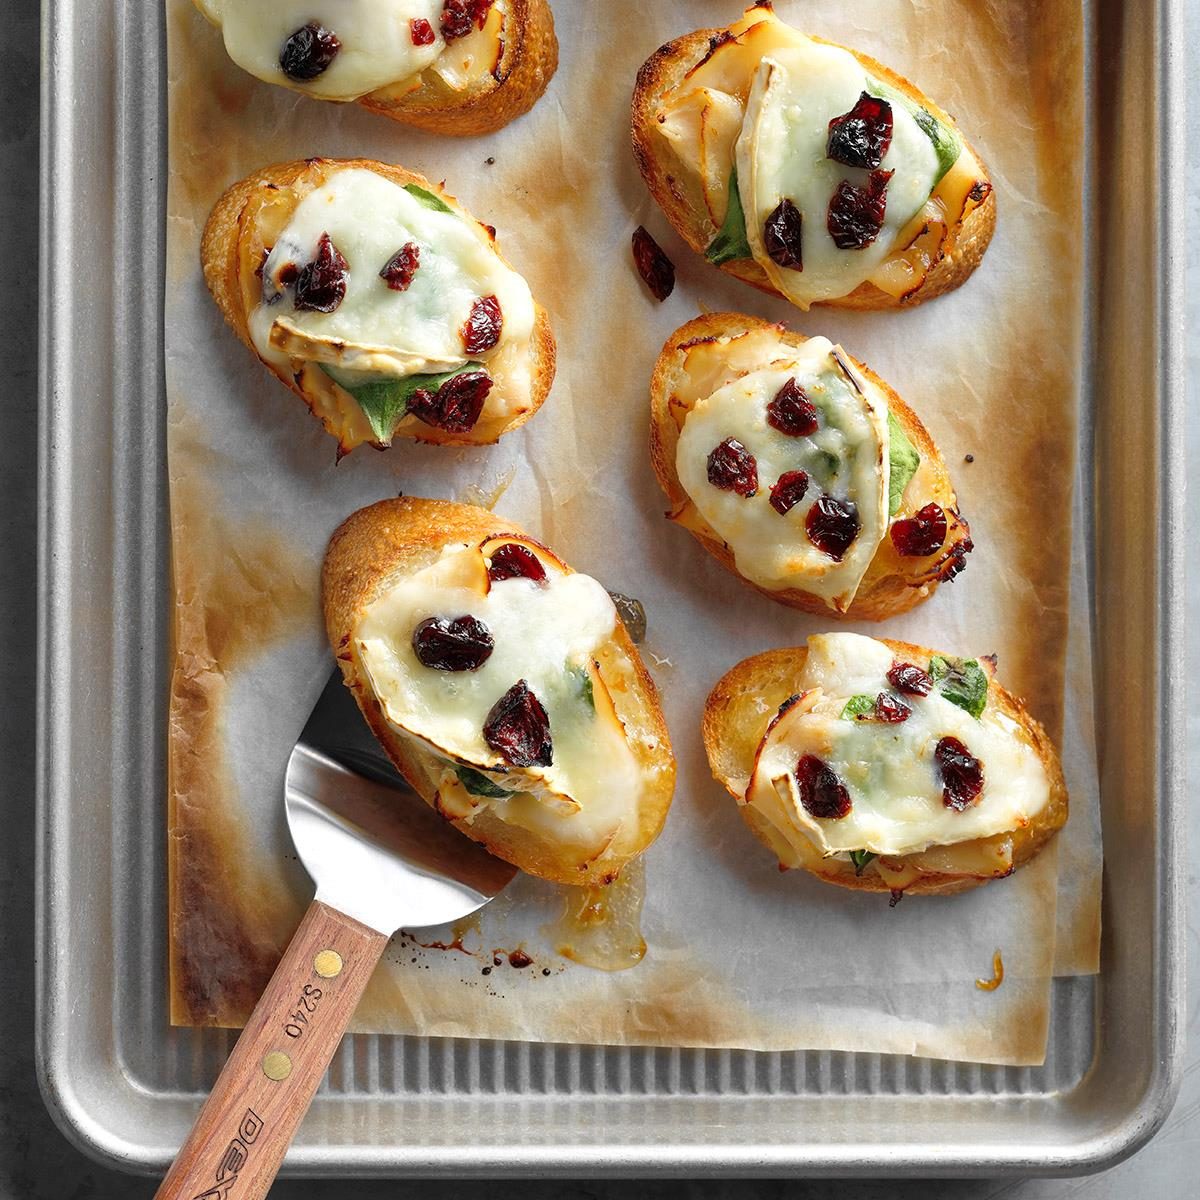 Merlot: Roasted Chicken and Brie Holly Mini Bites